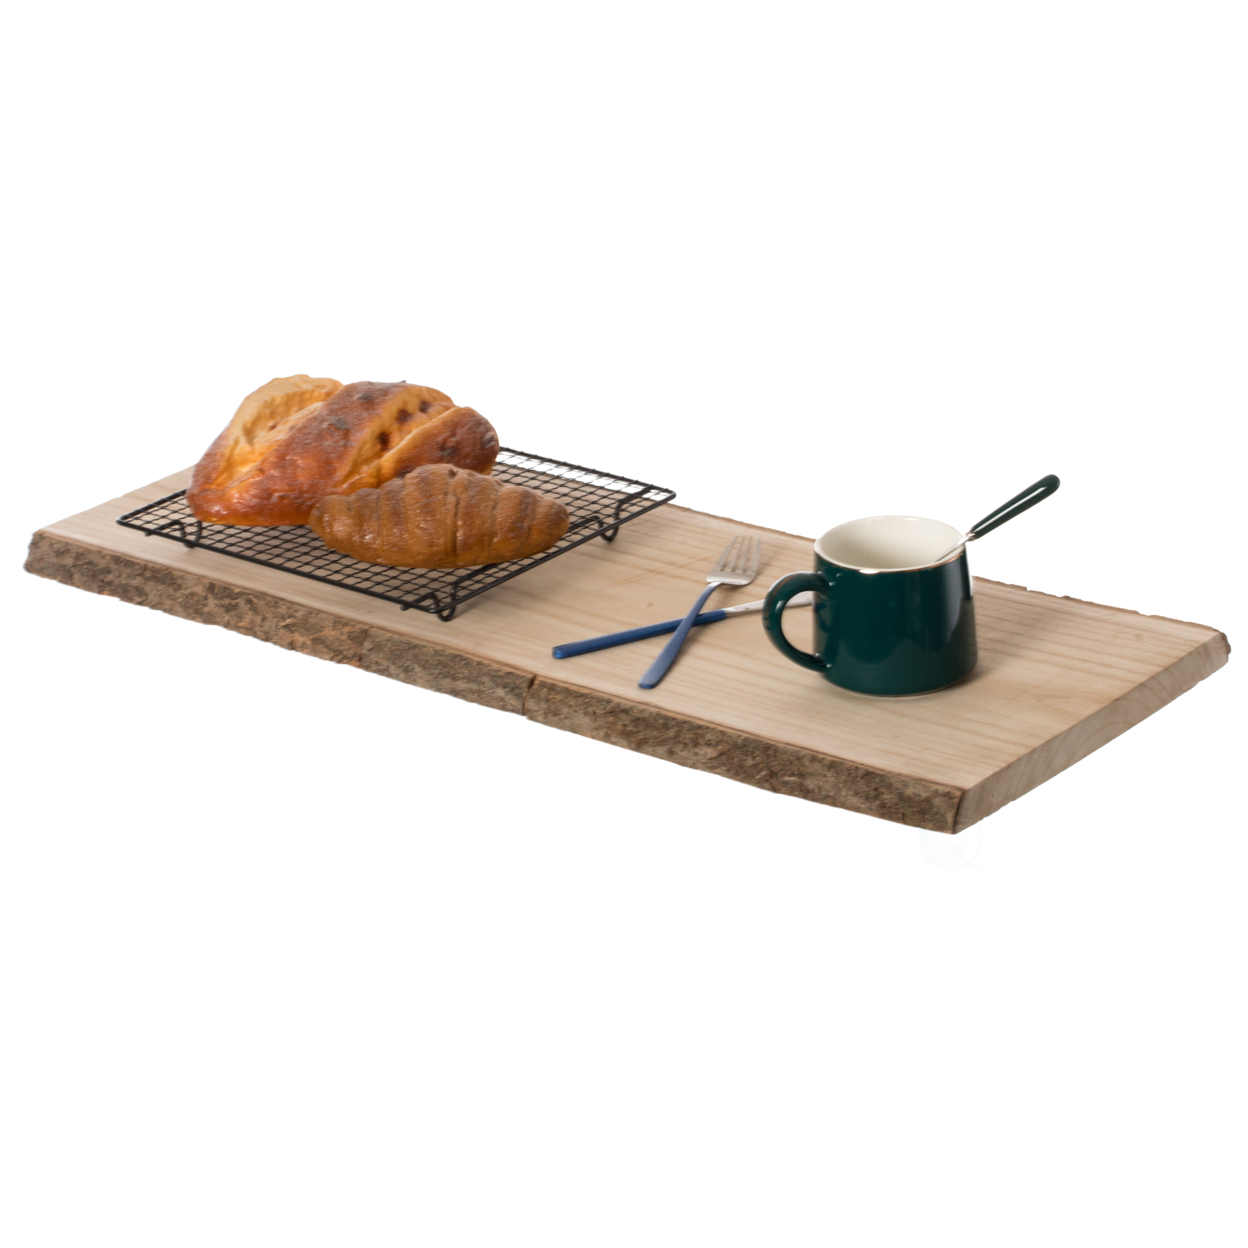 Rustic Natural Tree Log Wooden Rectangular Shape Serving Tray Cutting Board - 28